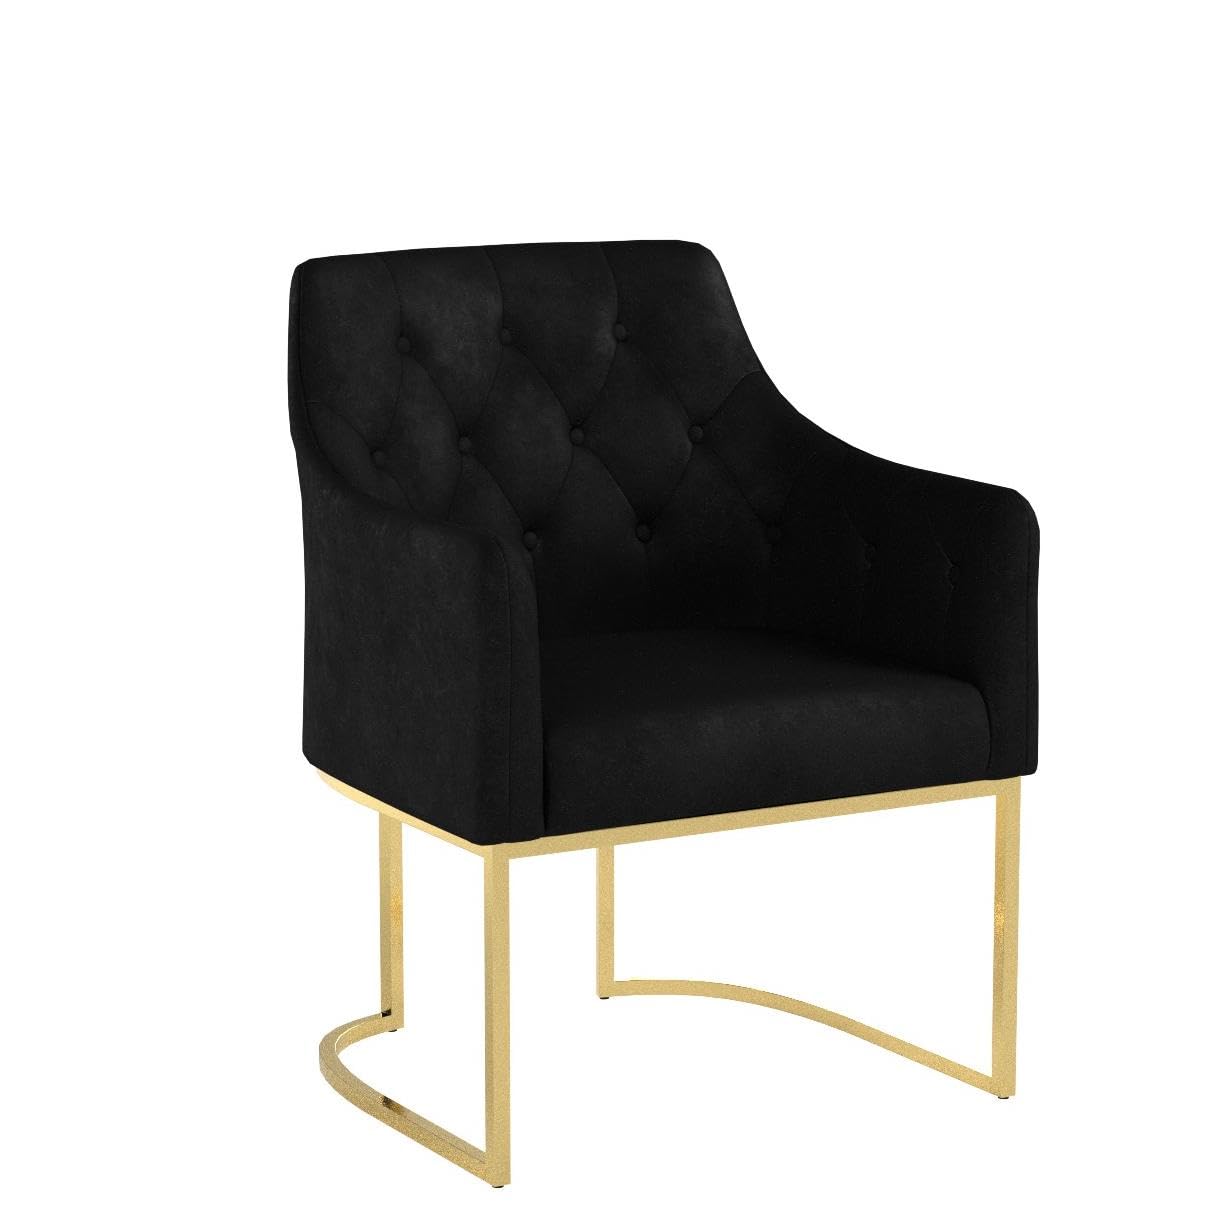 Christopher Knight Home Fern Modern Tufted Glam Accent Chair with Velvet Cushions and U-Shaped Base, Black and Gold Finish